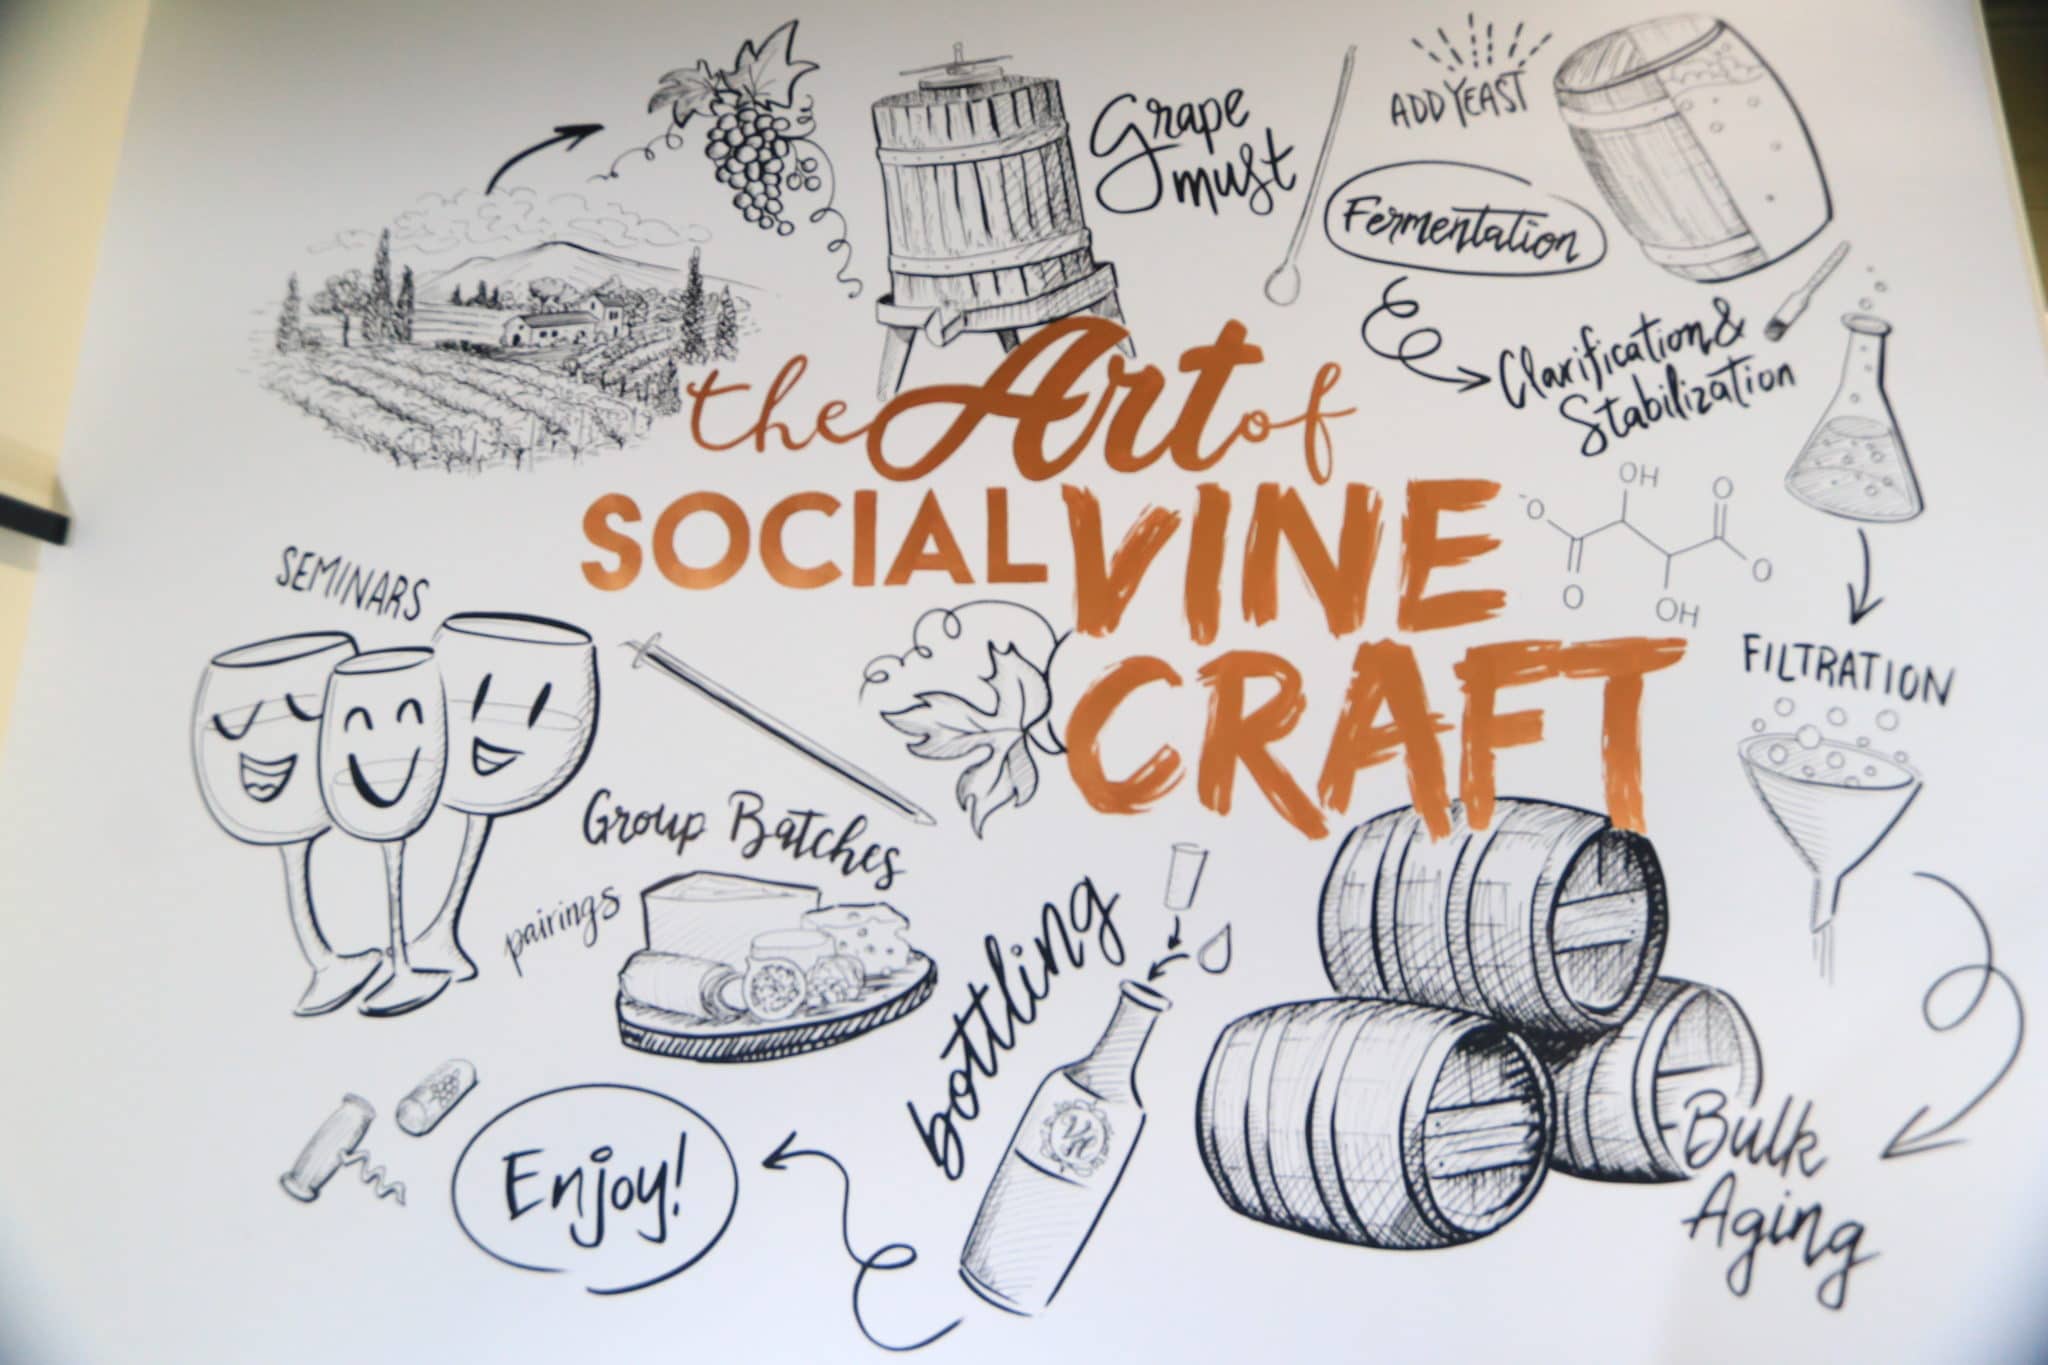 The Art of Social Vine Craft Mural on white wall depicting wine making process